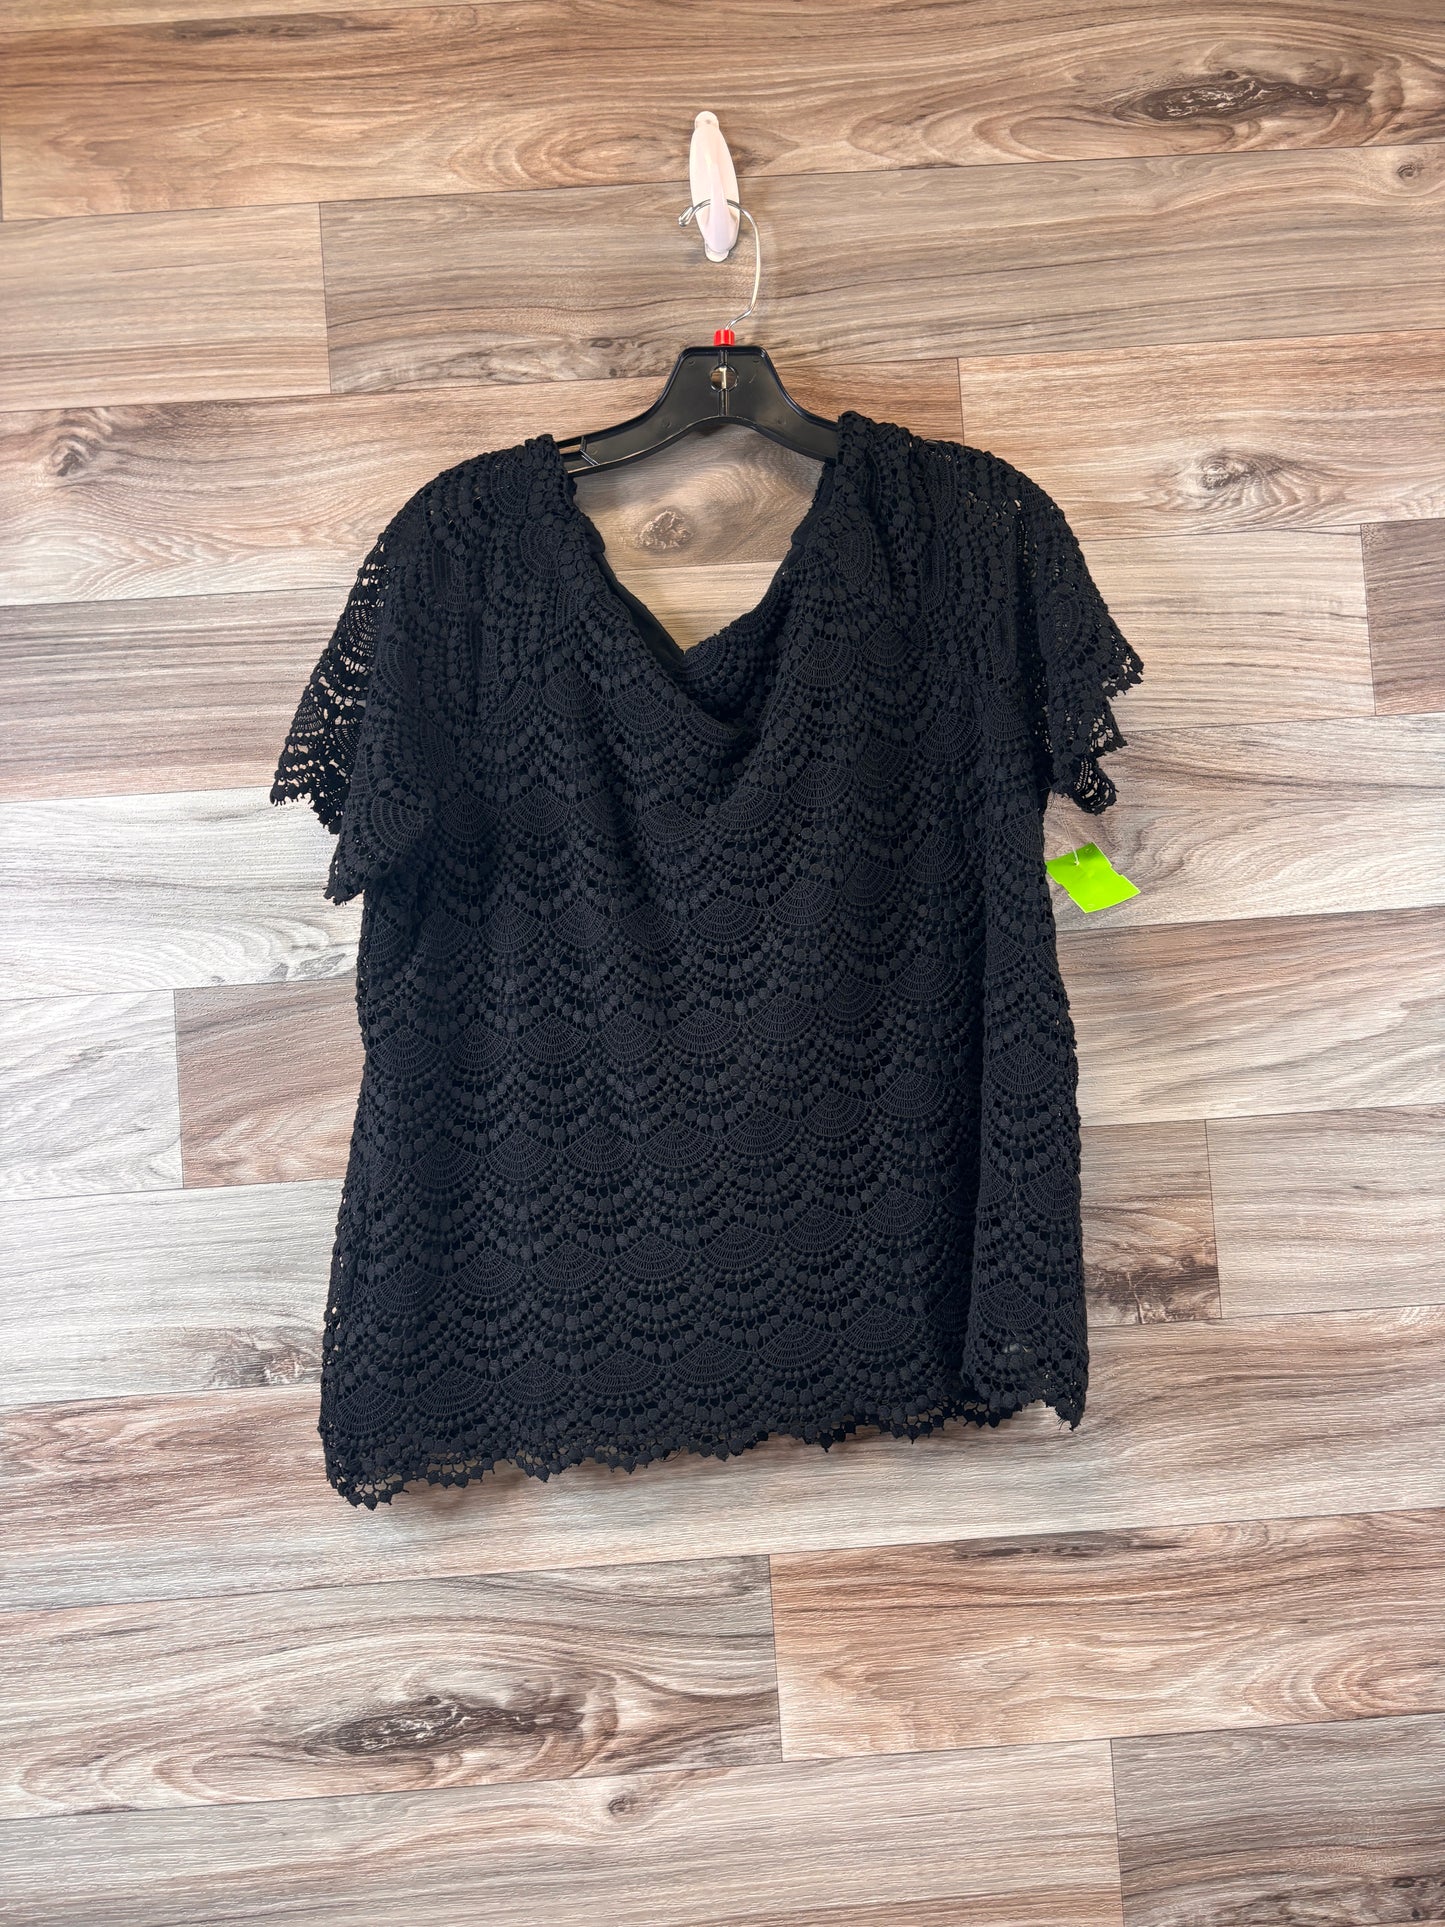 Top Short Sleeve By Talbots  Size: Xl